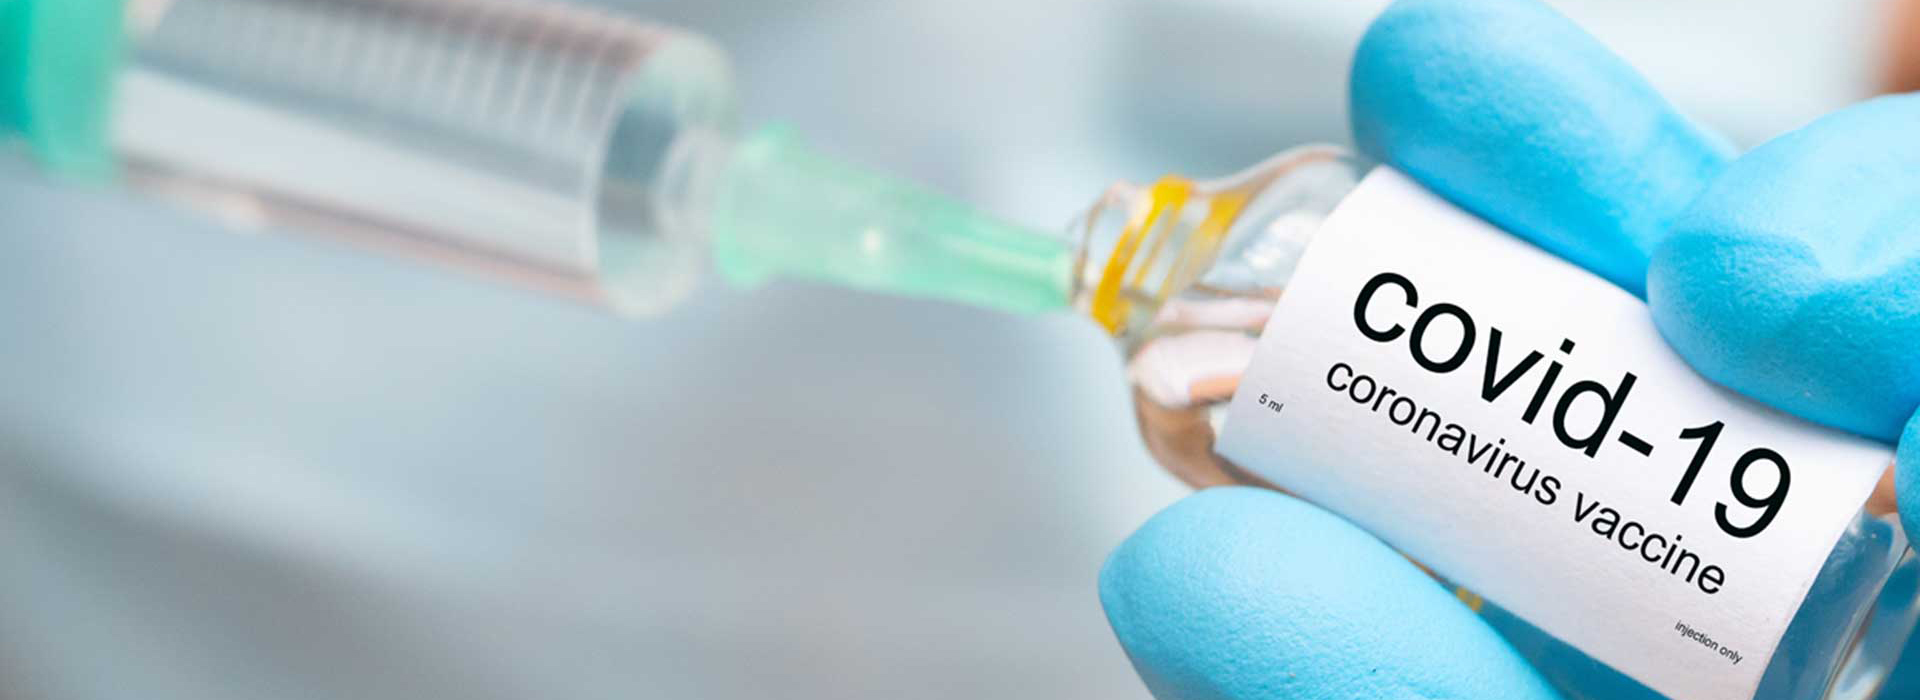 syringe getting vaccine from bottle